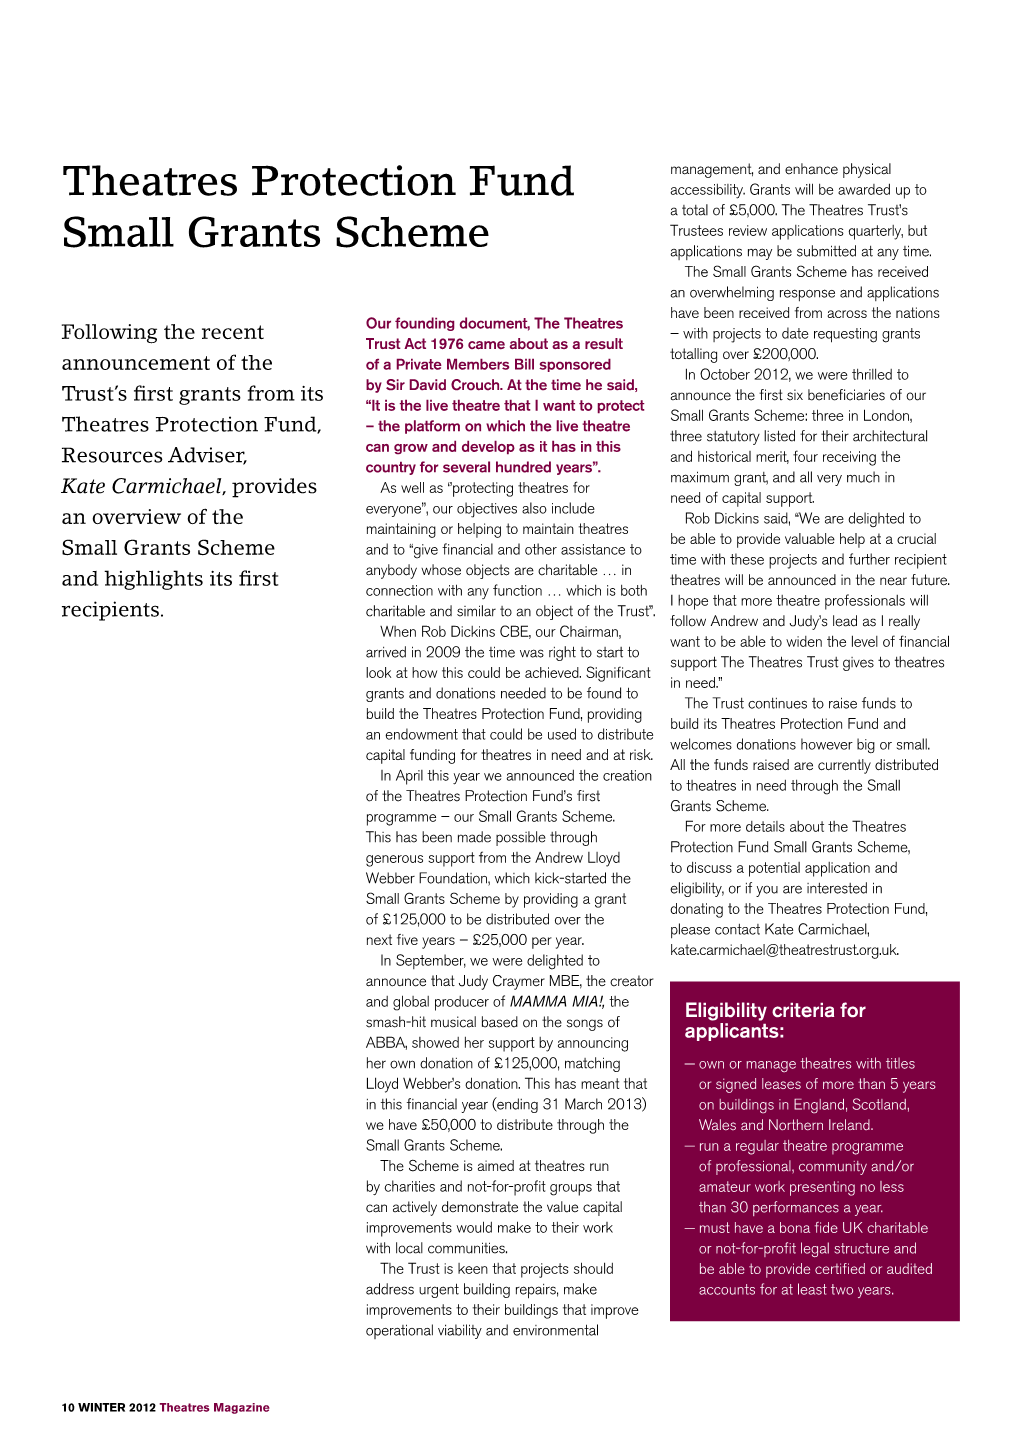 Theatres Protection Fund Small Grants Scheme